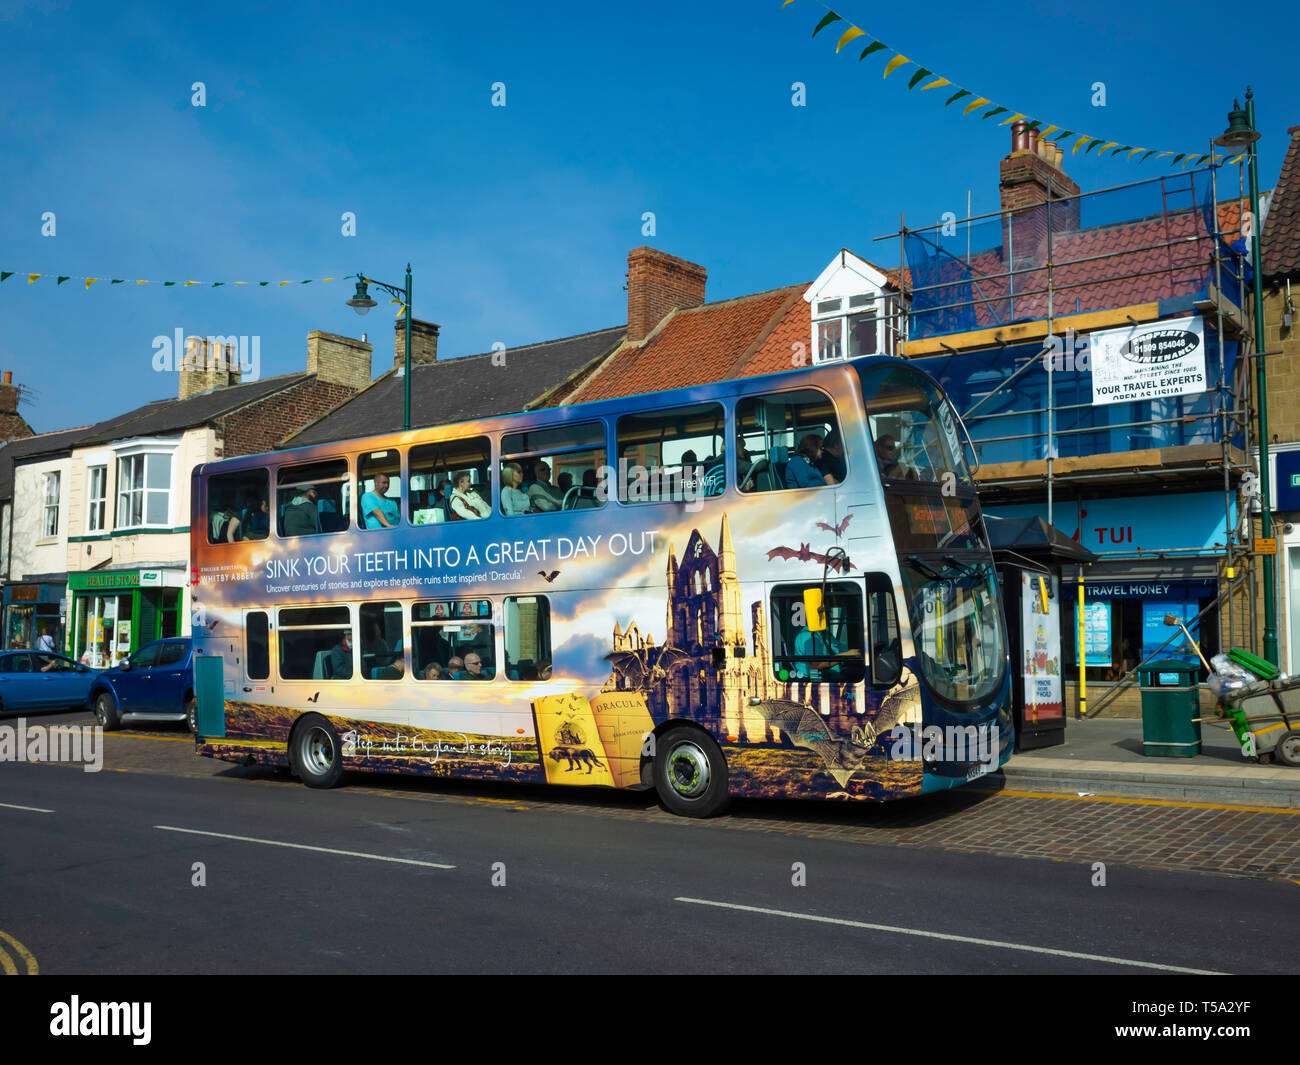 A double decker Midddlsbrough to Whitby bus at Guisborough North Yorkshire the bus covered in promotional images of Tourist Attractions in Whitby Stock Photo